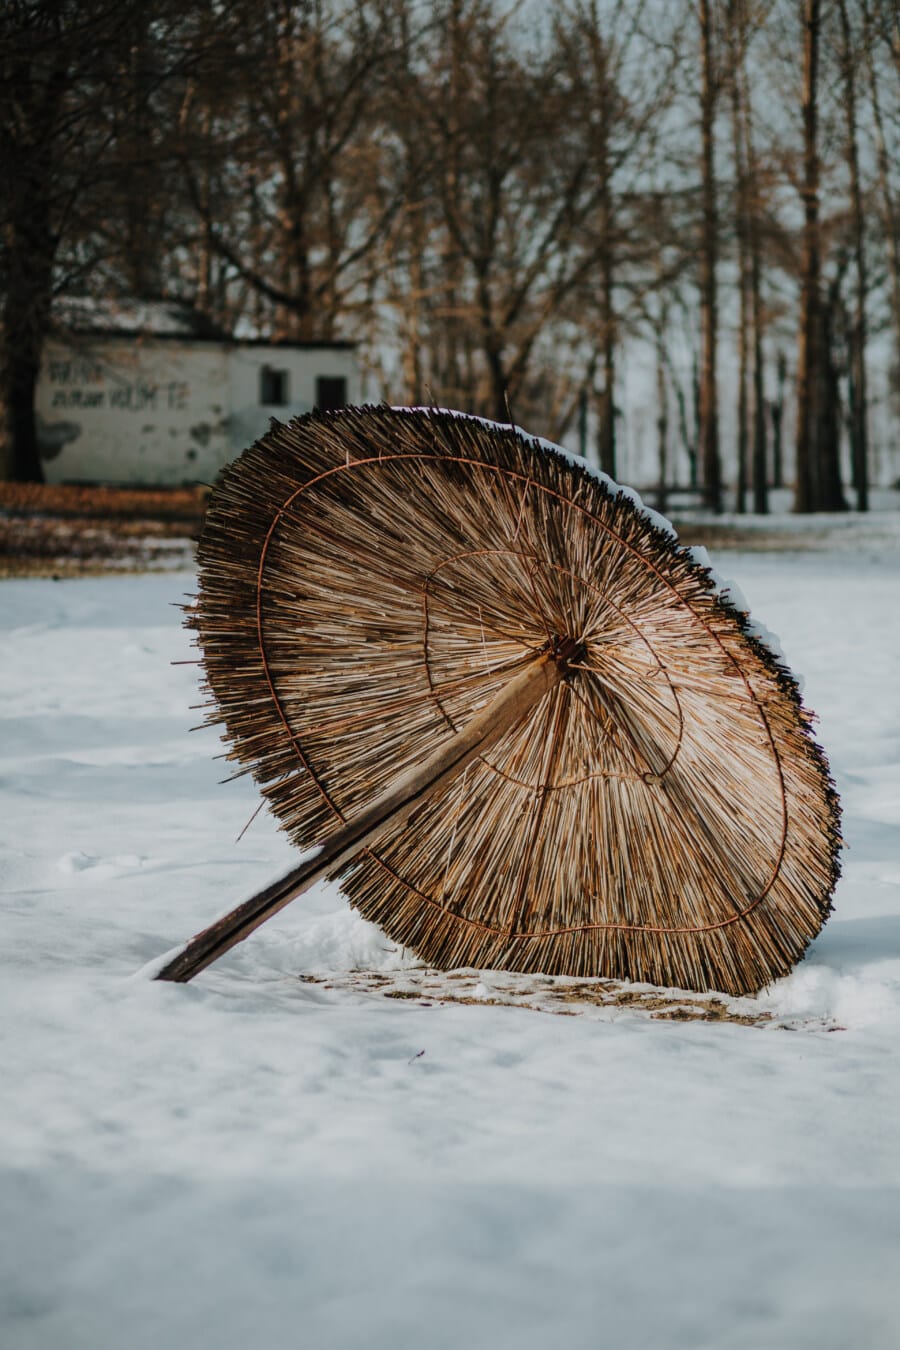 winter, beach, parasol, climate, cold, snowy, snow, nature, wood, outdoors